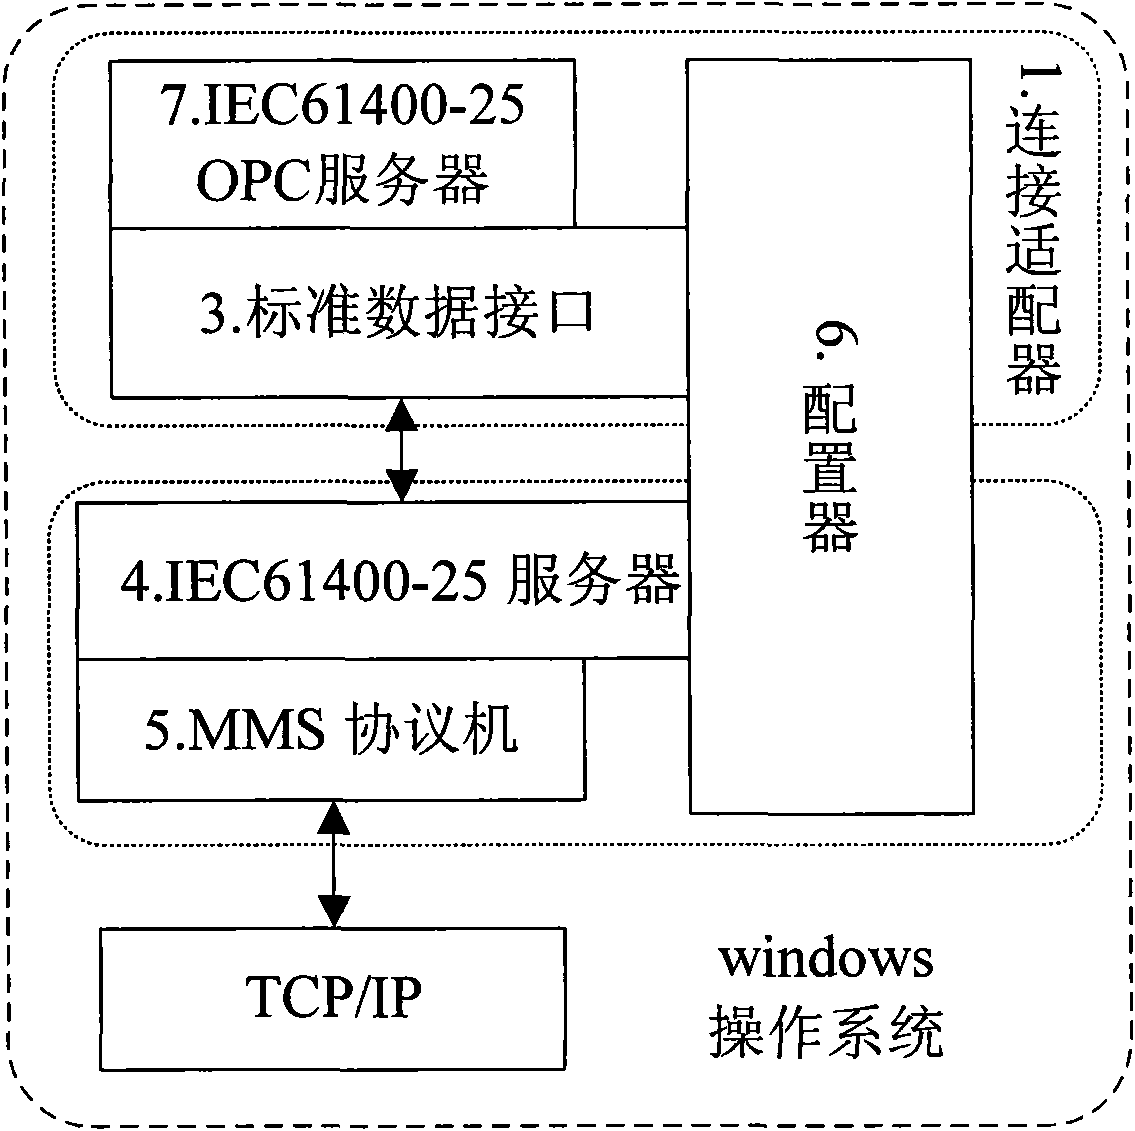 Method for monitoring communication protocol adaptation of wind power station